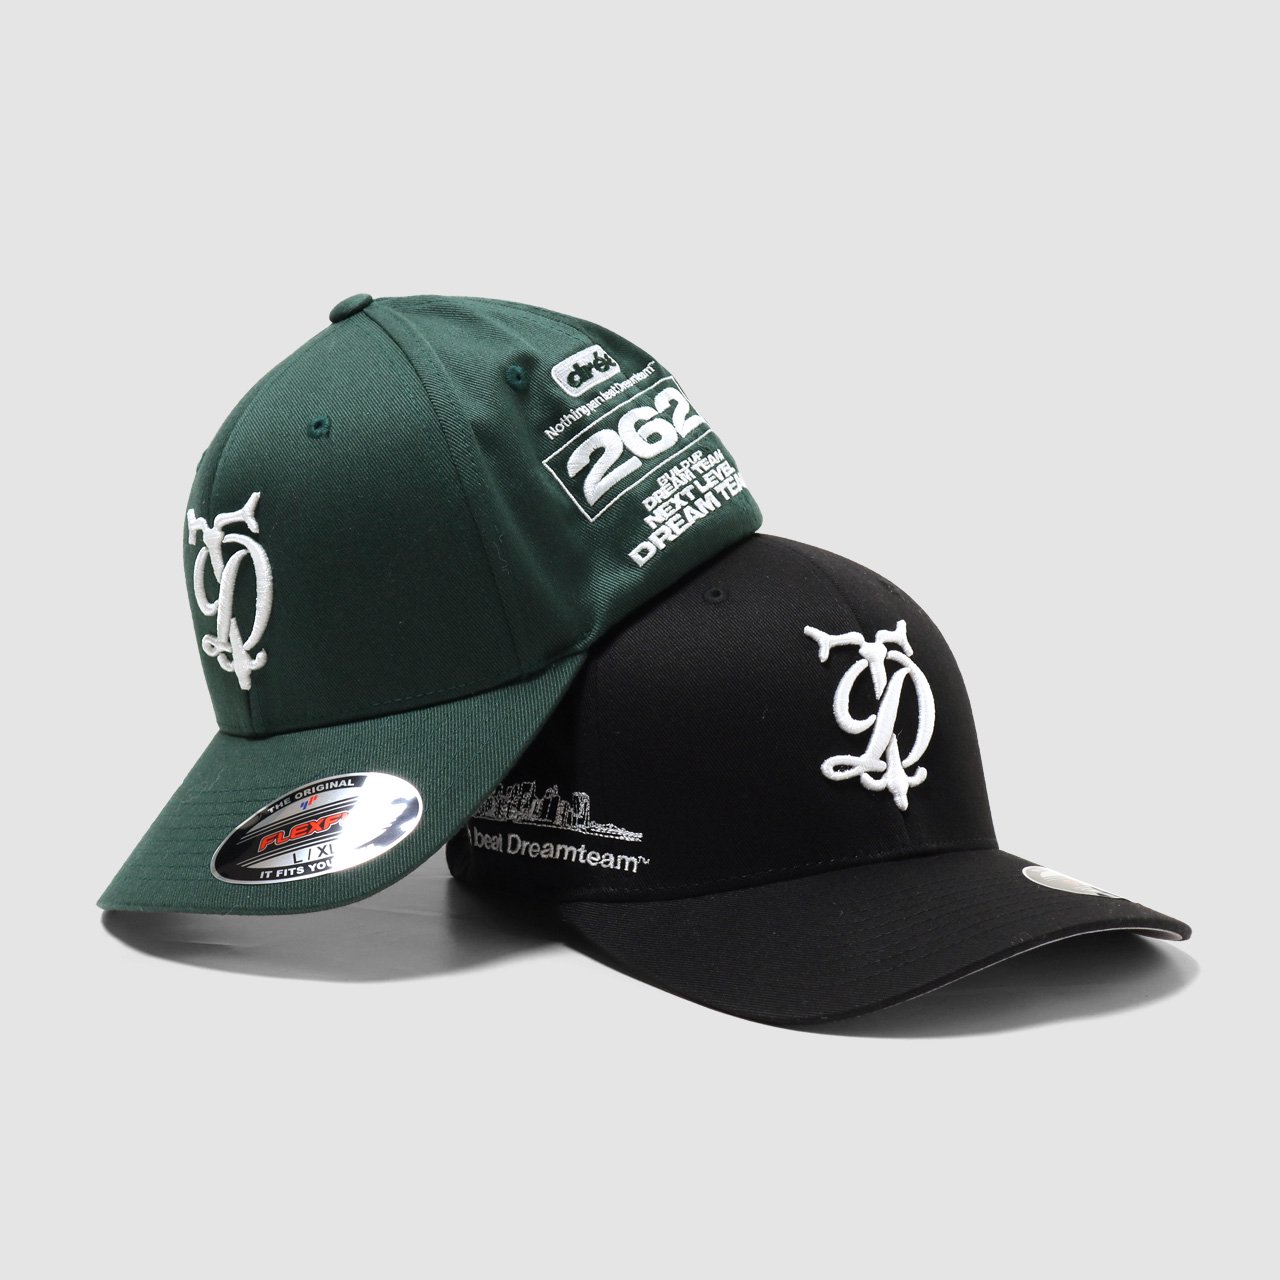 <img class='new_mark_img1' src='https://img.shop-pro.jp/img/new/icons21.gif' style='border:none;display:inline;margin:0px;padding:0px;width:auto;' />DT Vintage Logo Flexfit Cap